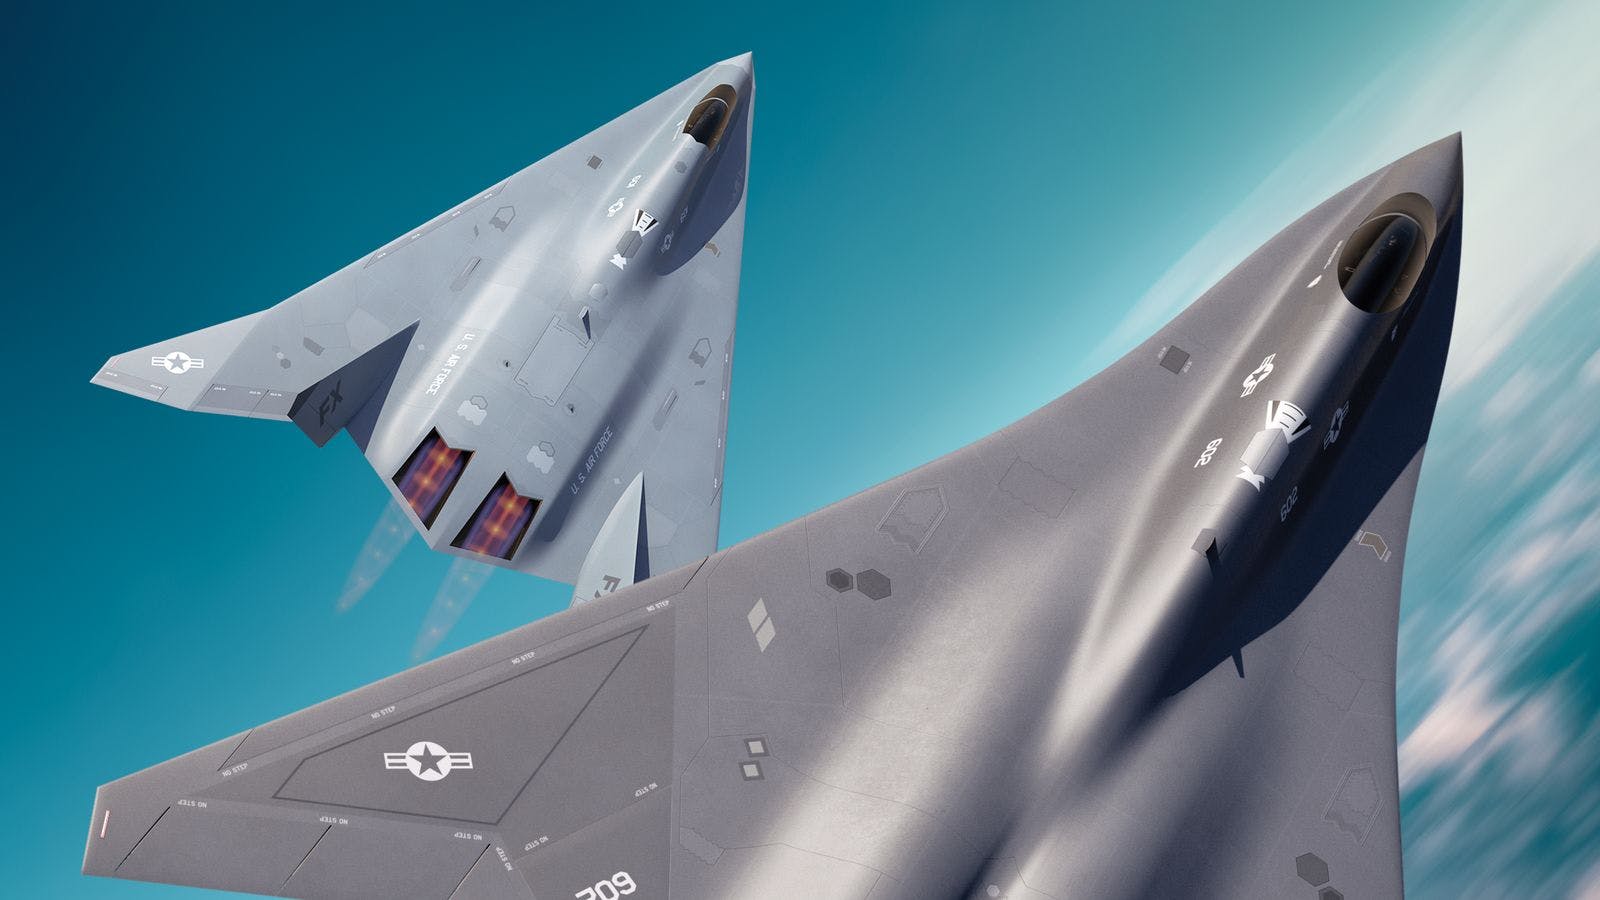 What's happening with NGAD and the sixth-gen fighter?